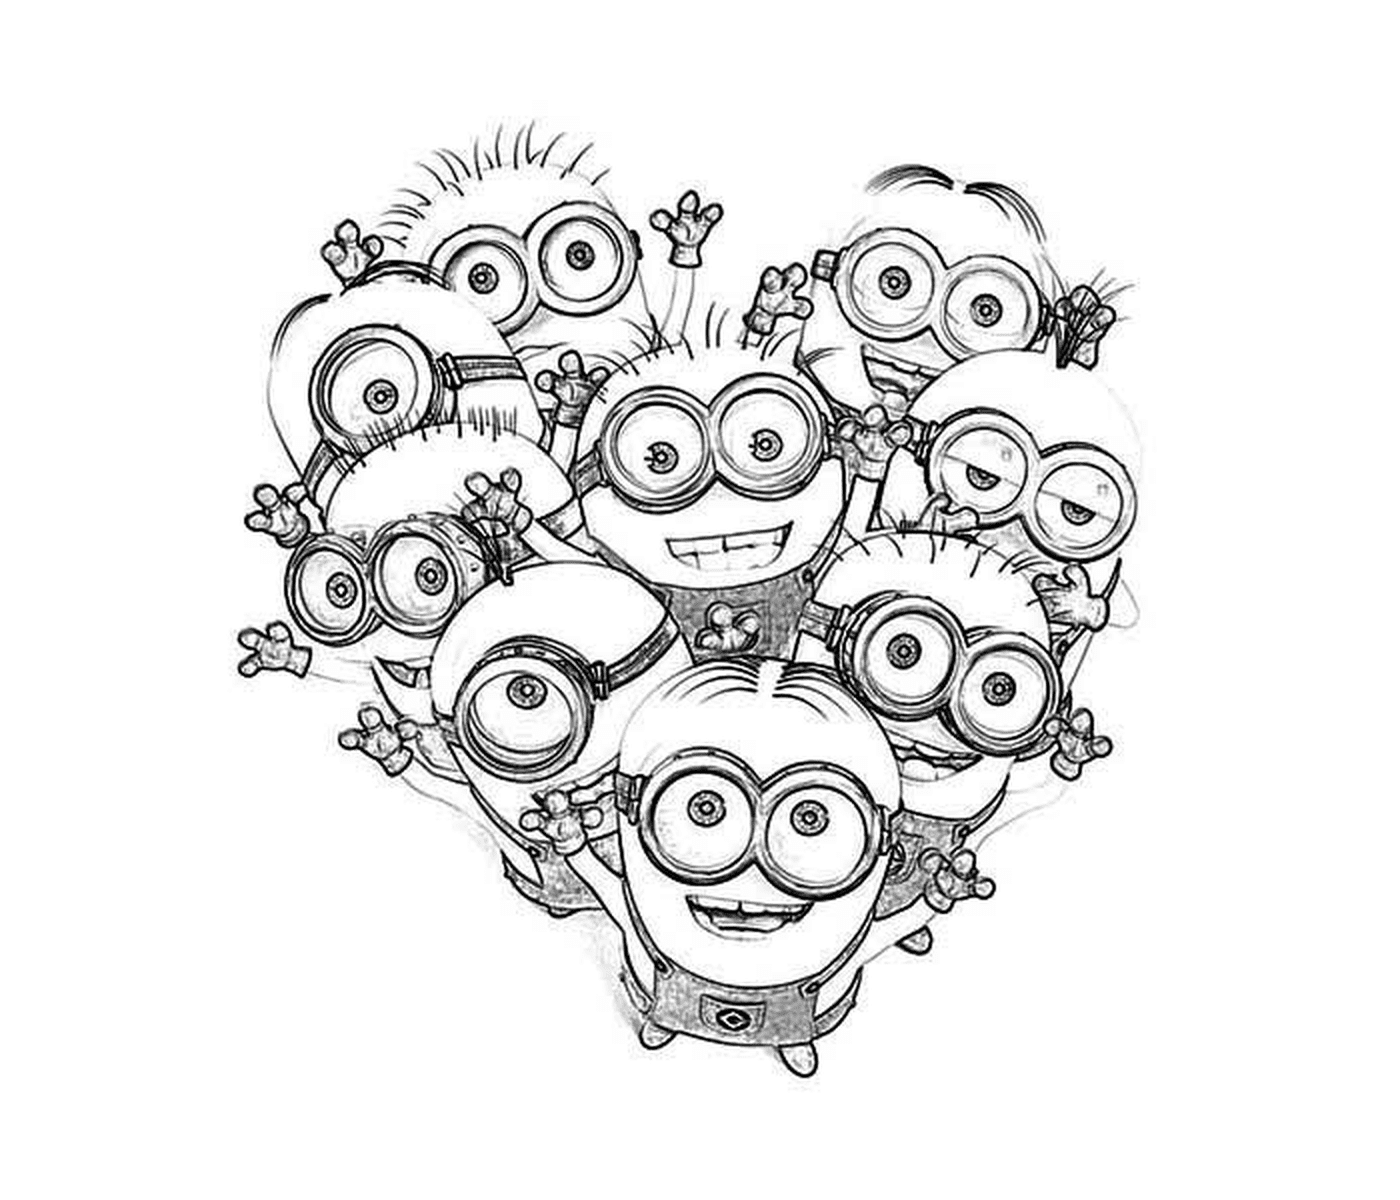  A group of minions 